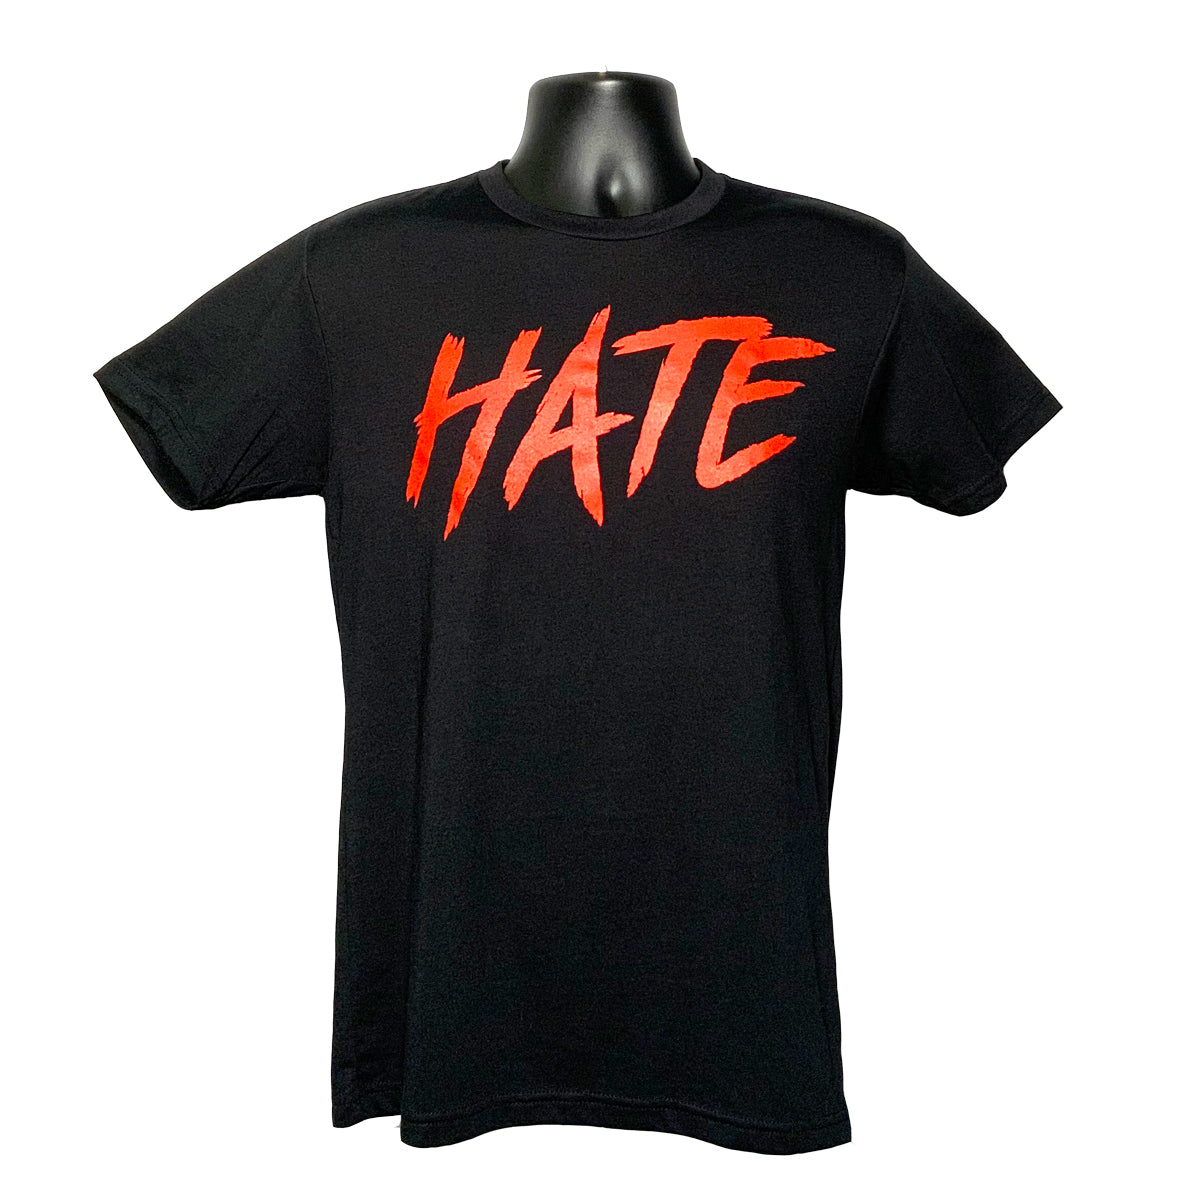 HATE T-Shirt Black/Red